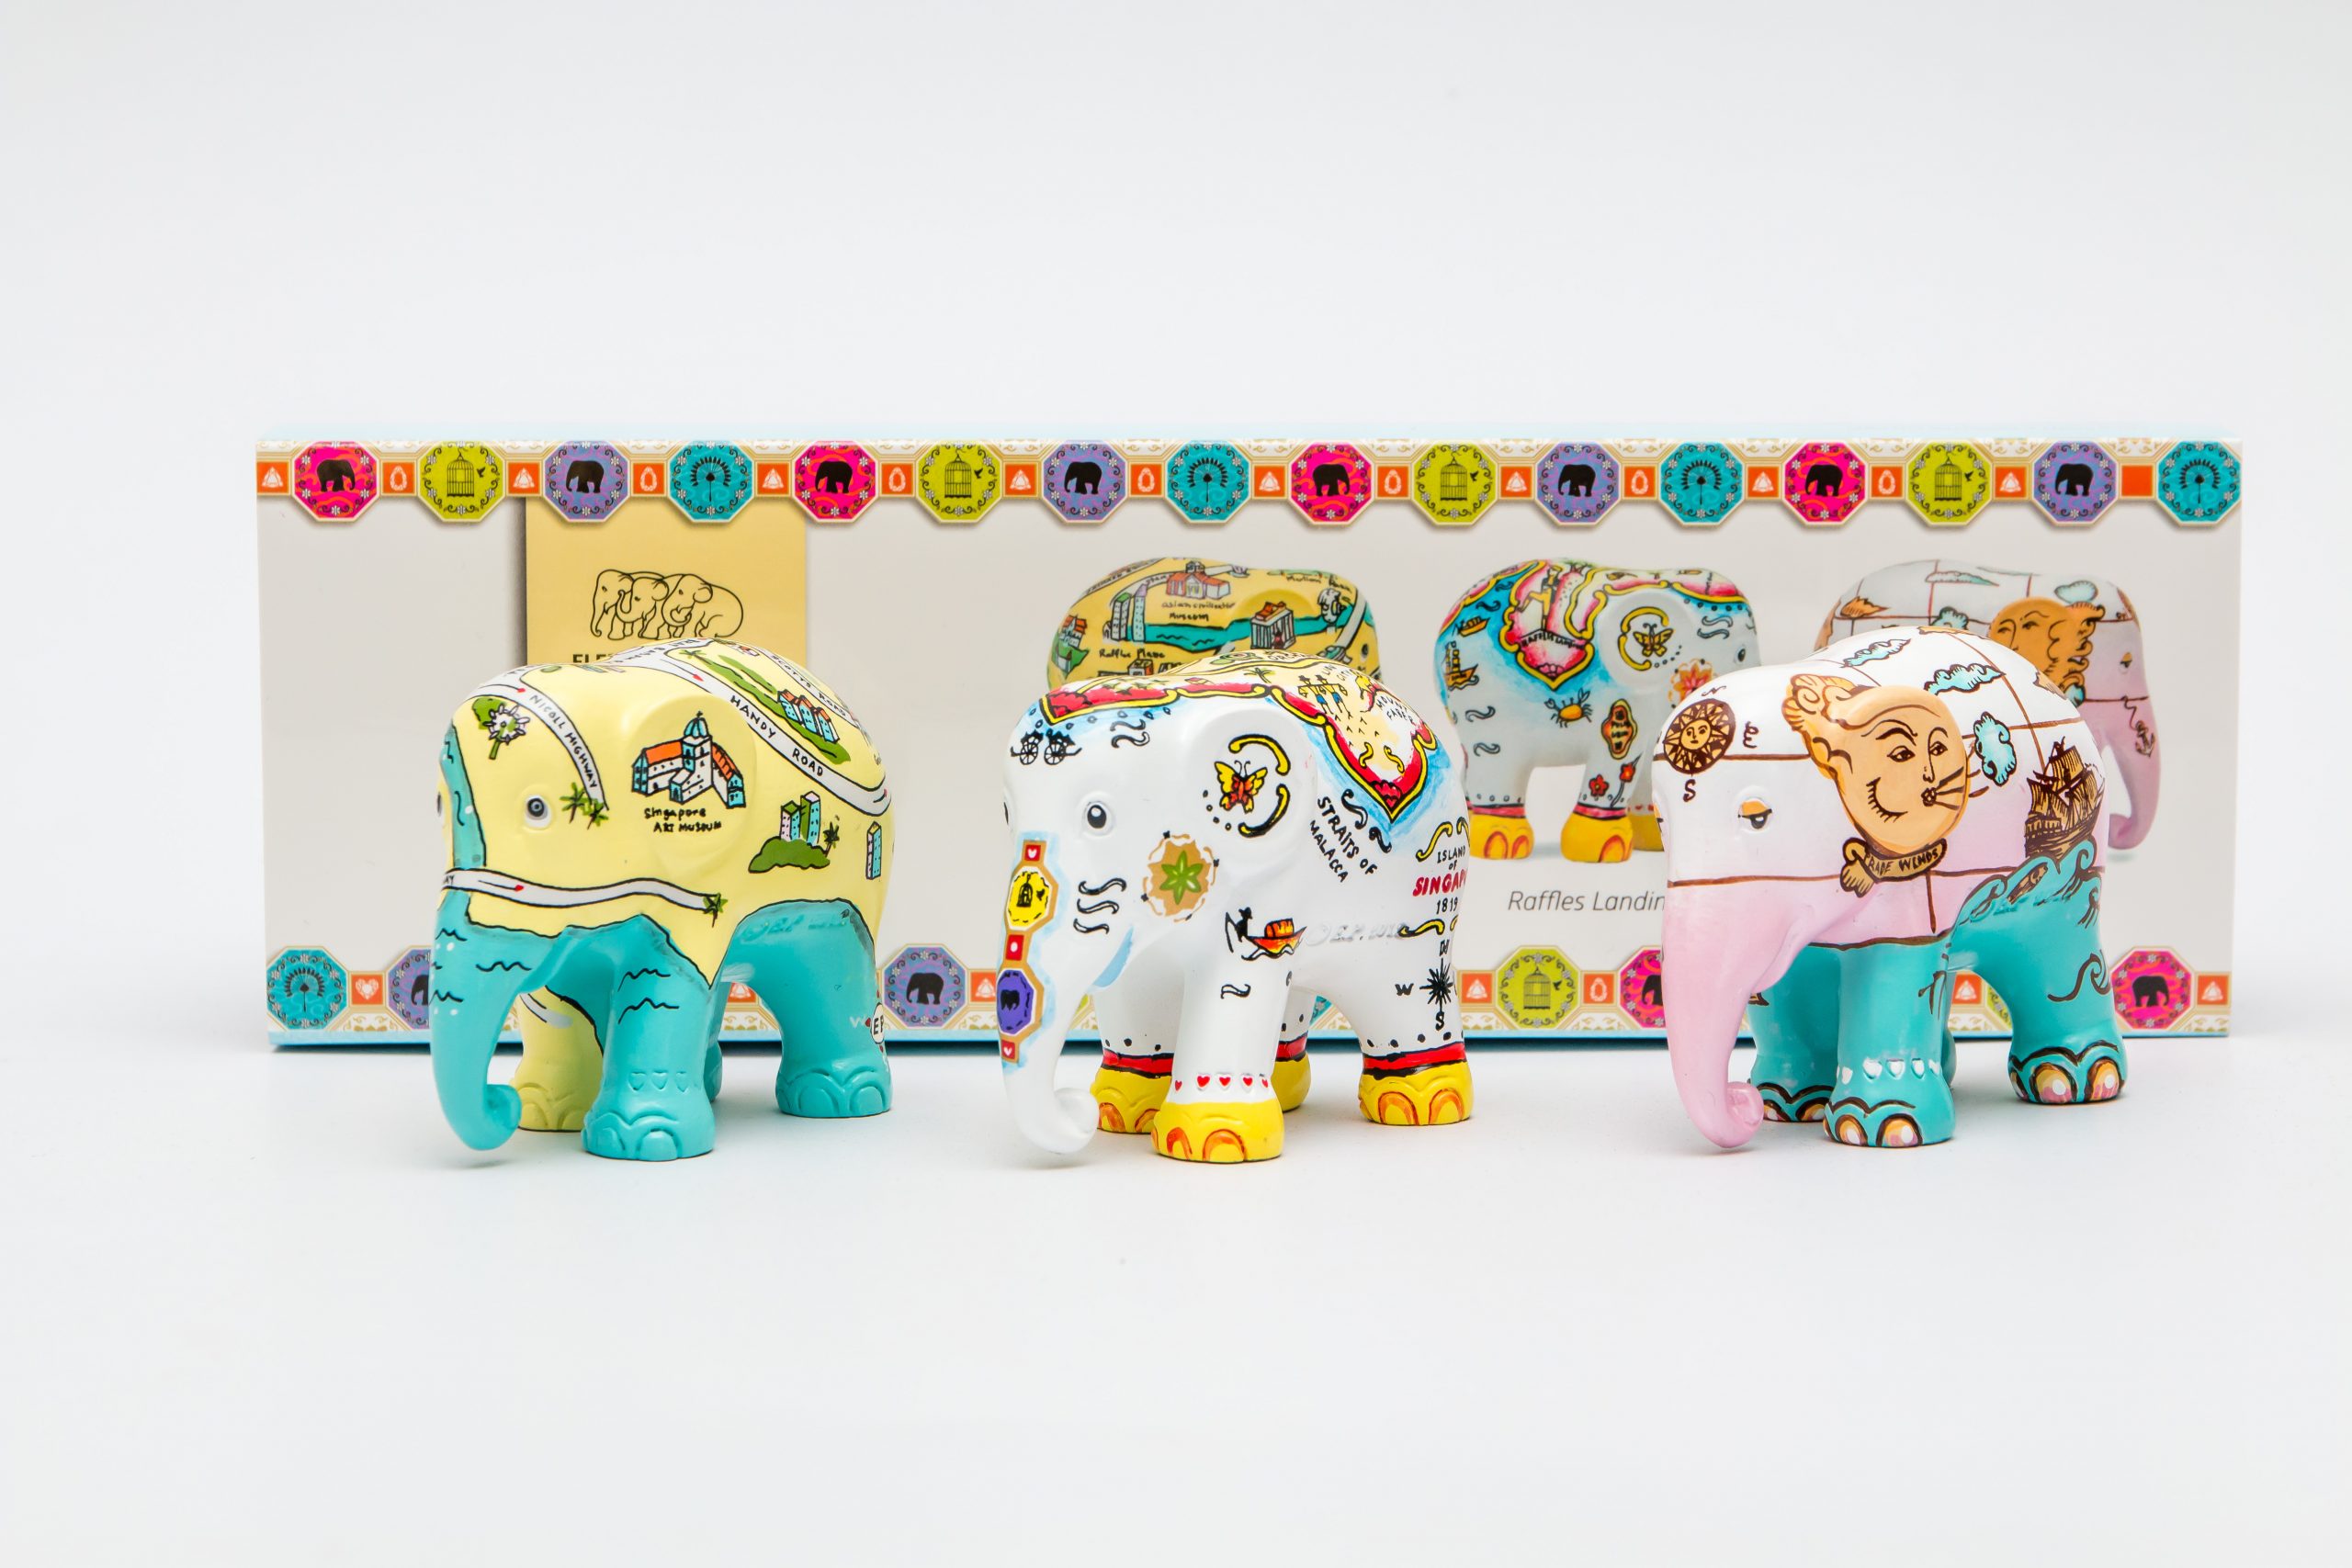 Singapore Stories Elephant Parade 3 Pack Giftbox - get the perfect Singapore leaving gift at The Cinnamon Room